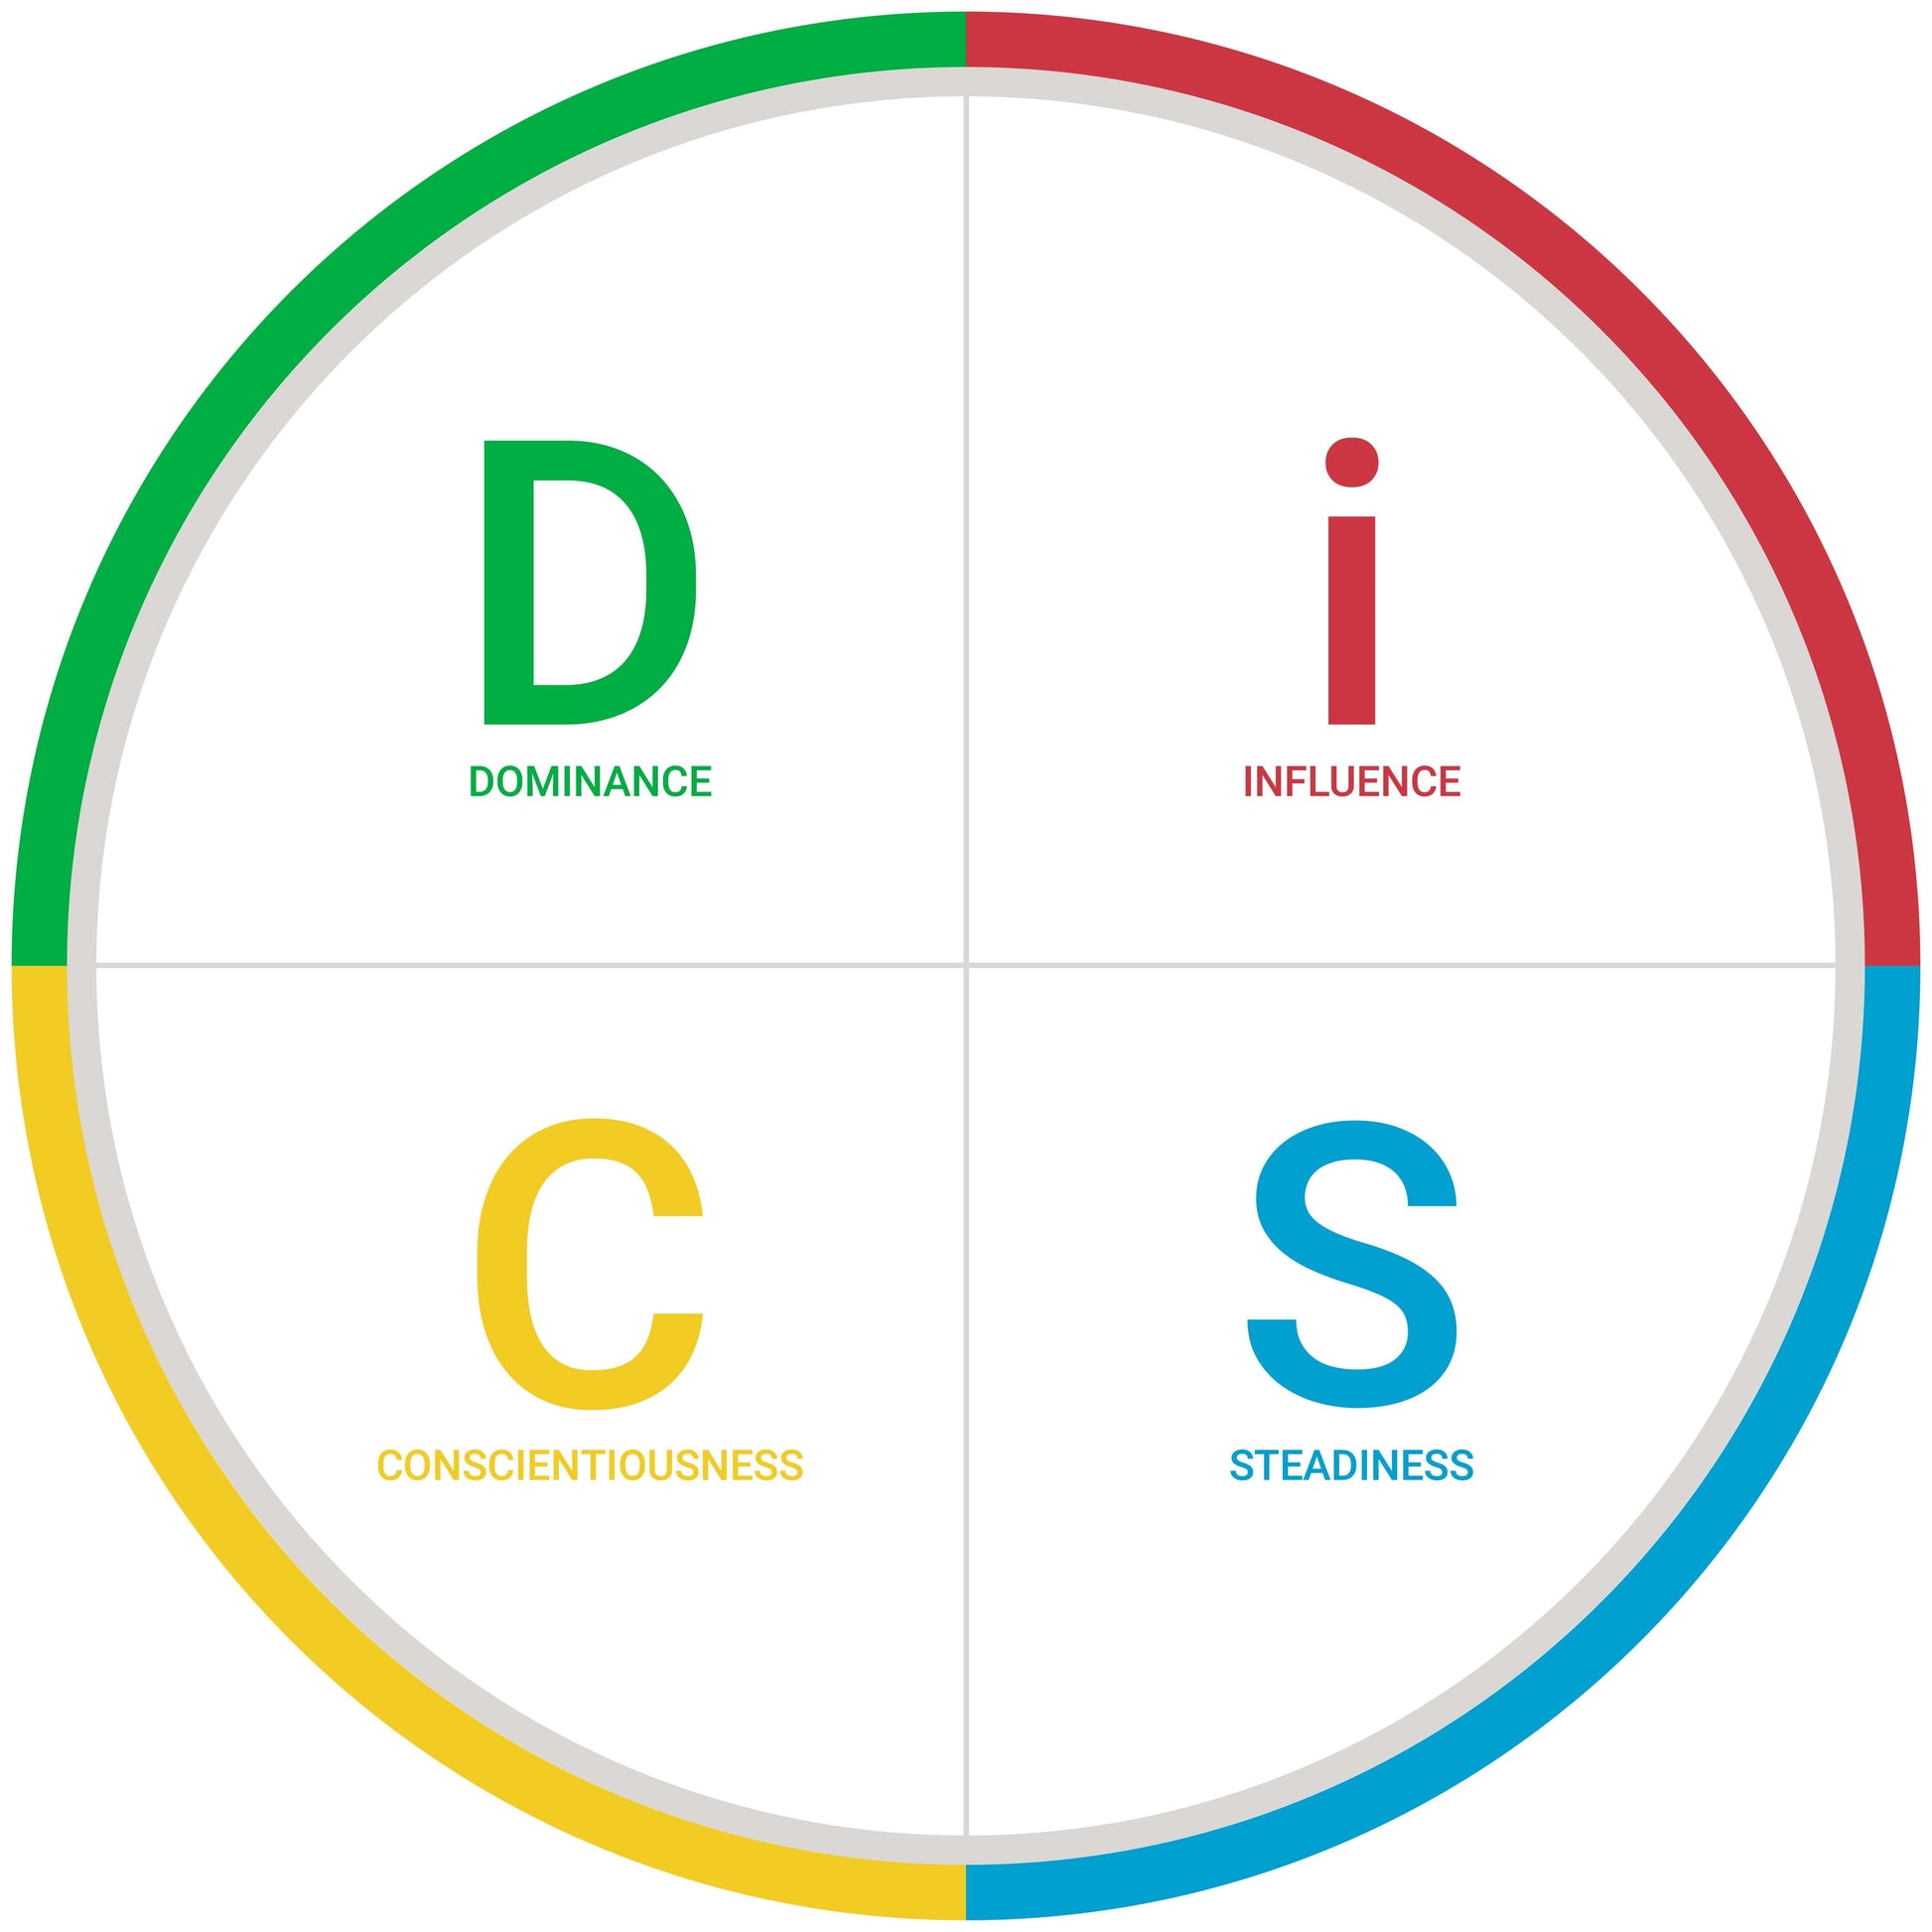 DiSC is perfect for positive teams work. Your report will tell you about yourself and about interacting with people with other styles.